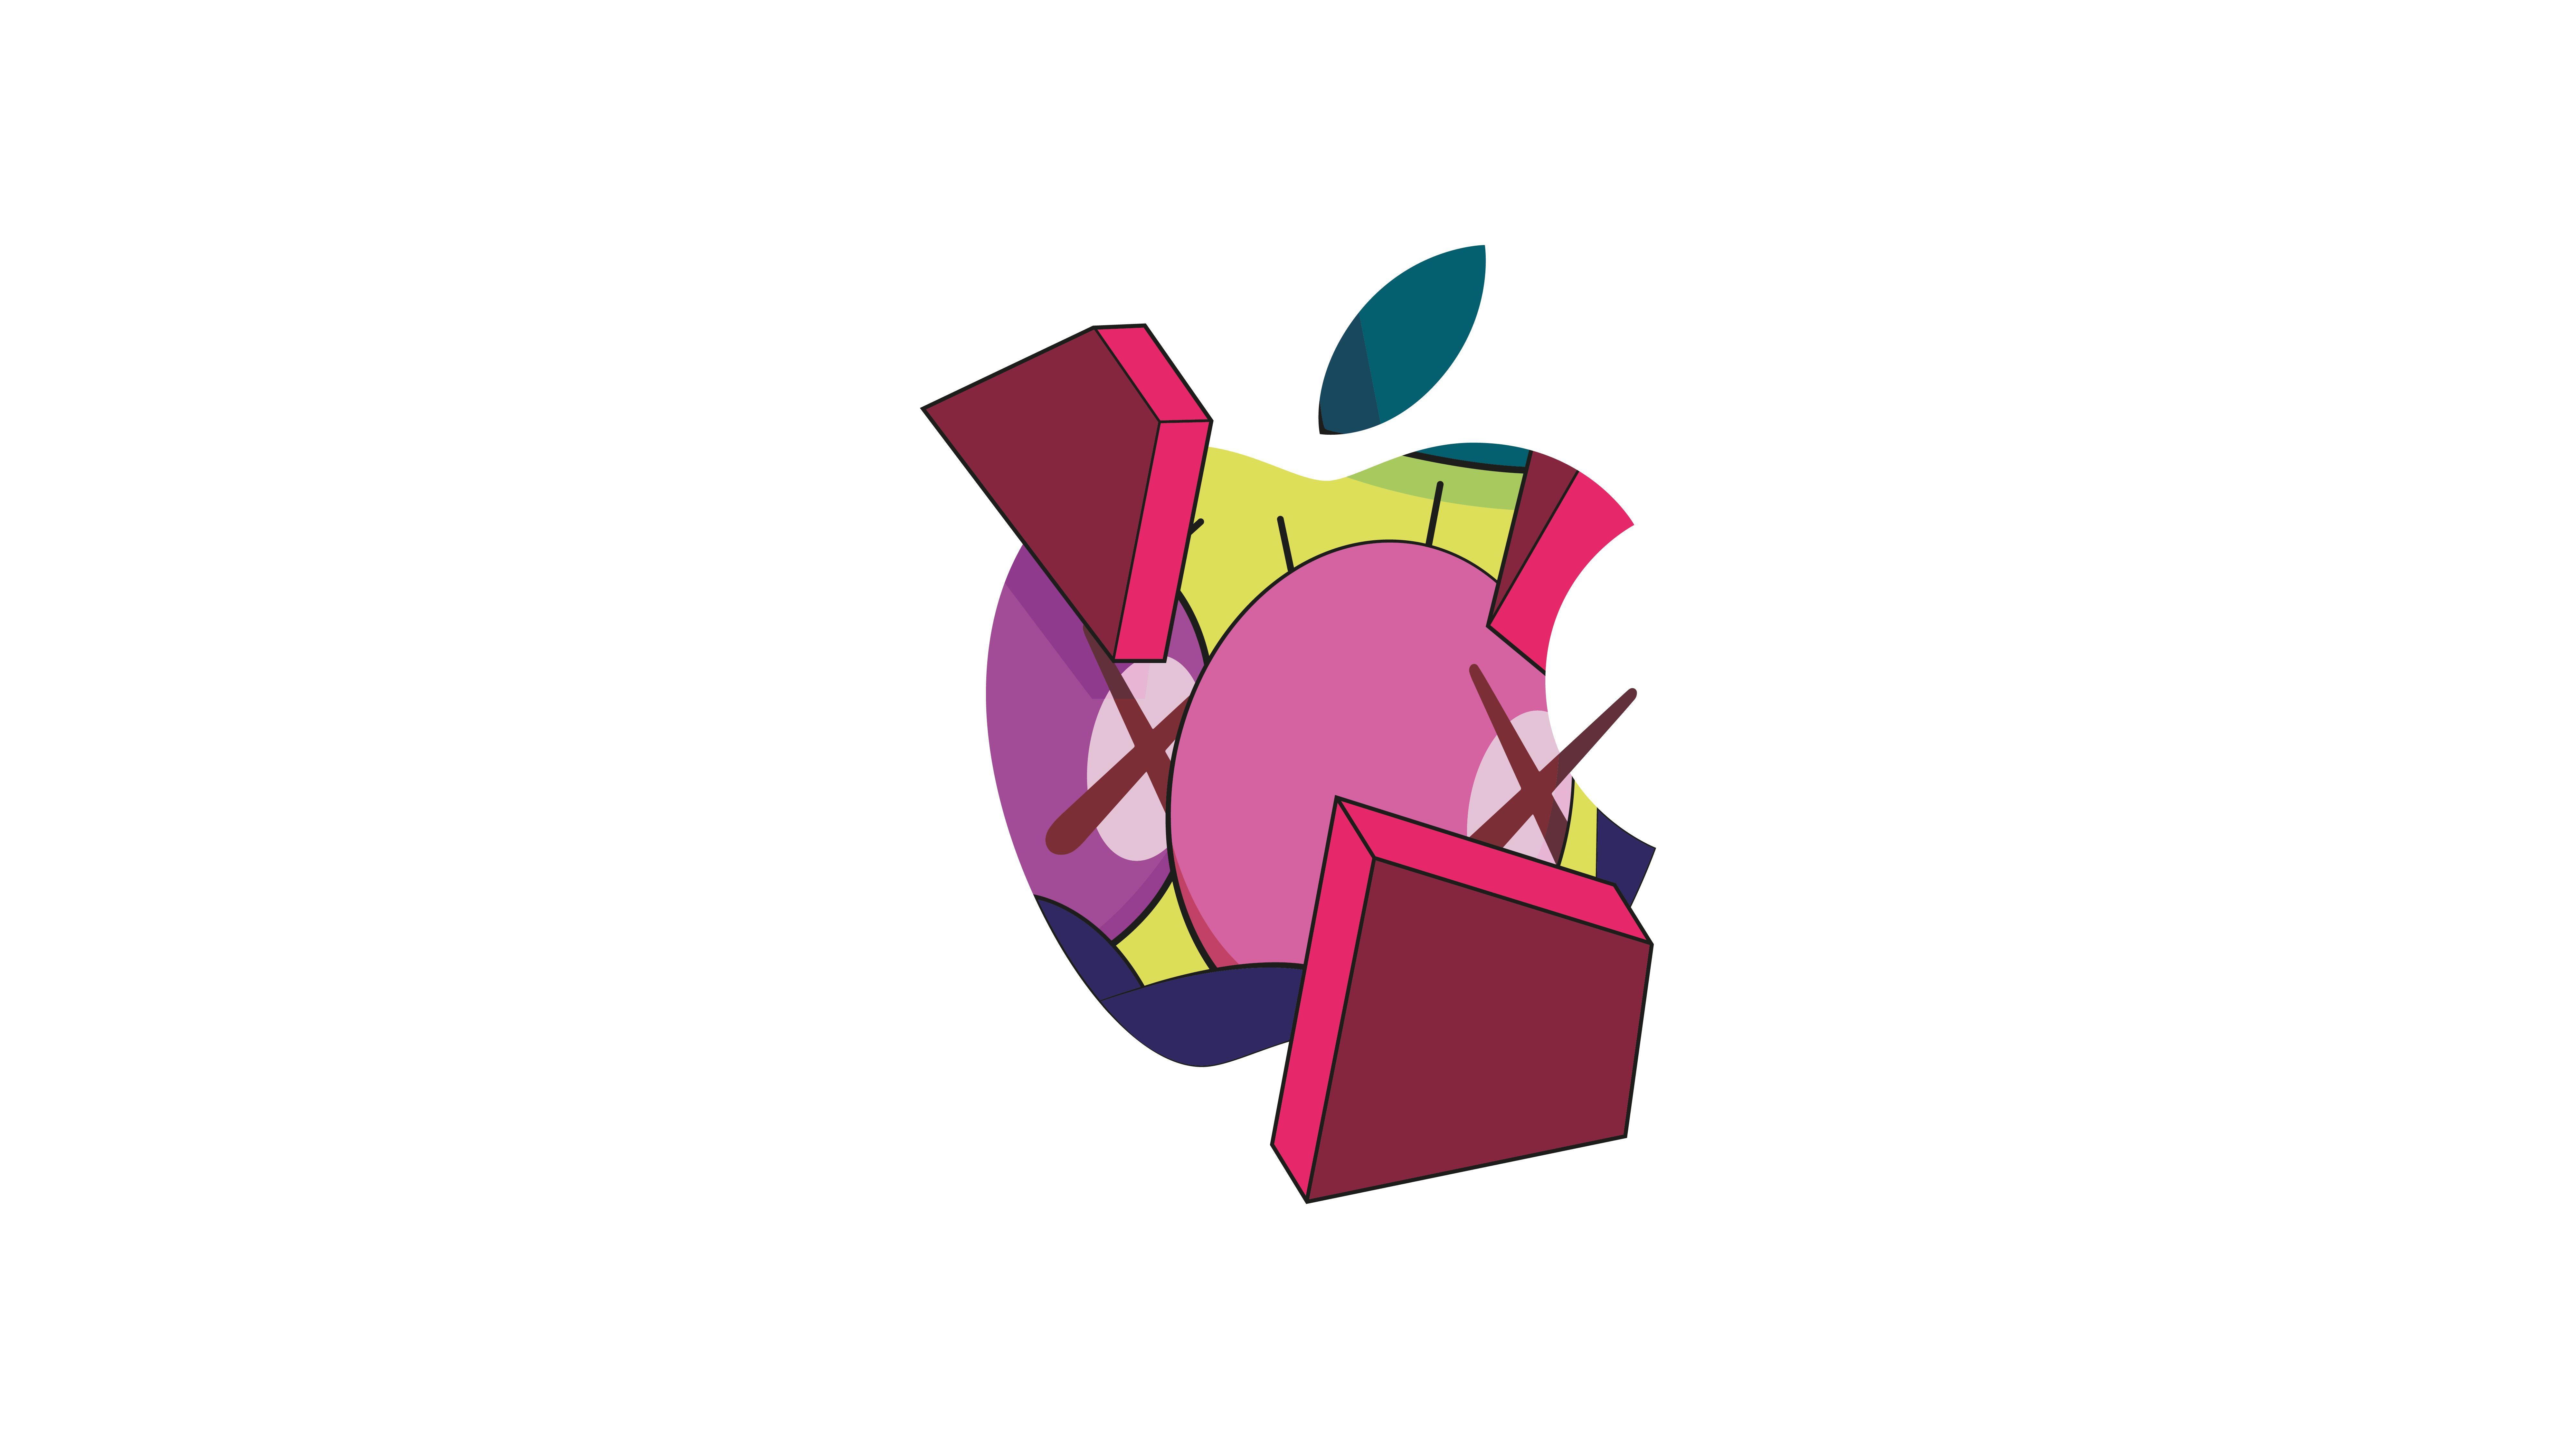 Kaws Logo - I made a high resolution version of the KAWS Apple logo from the ...